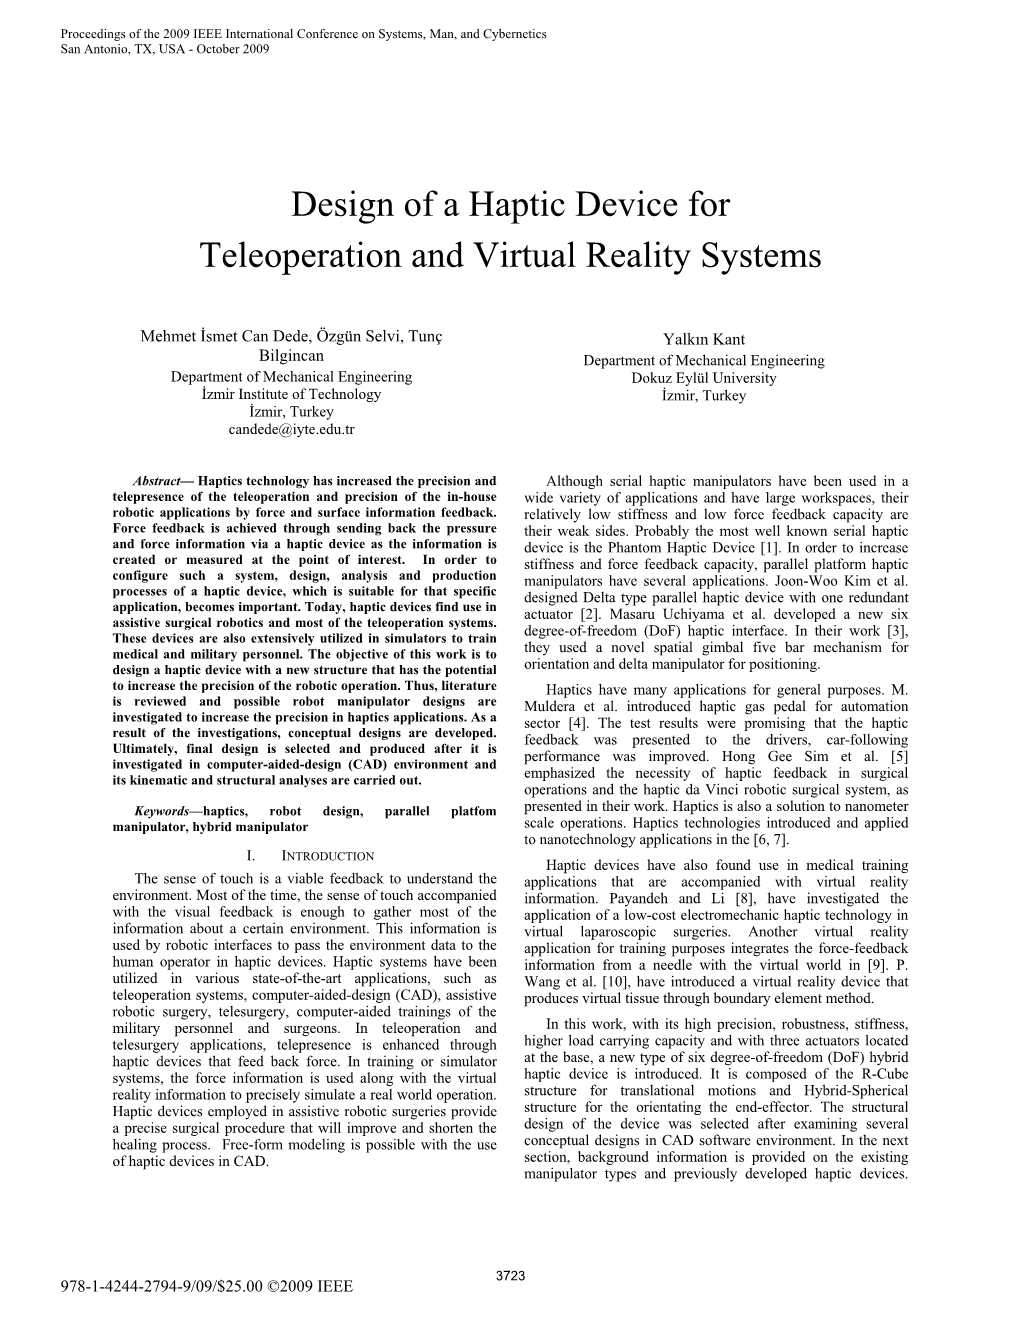 Design of a Haptic Device for Precision Operations